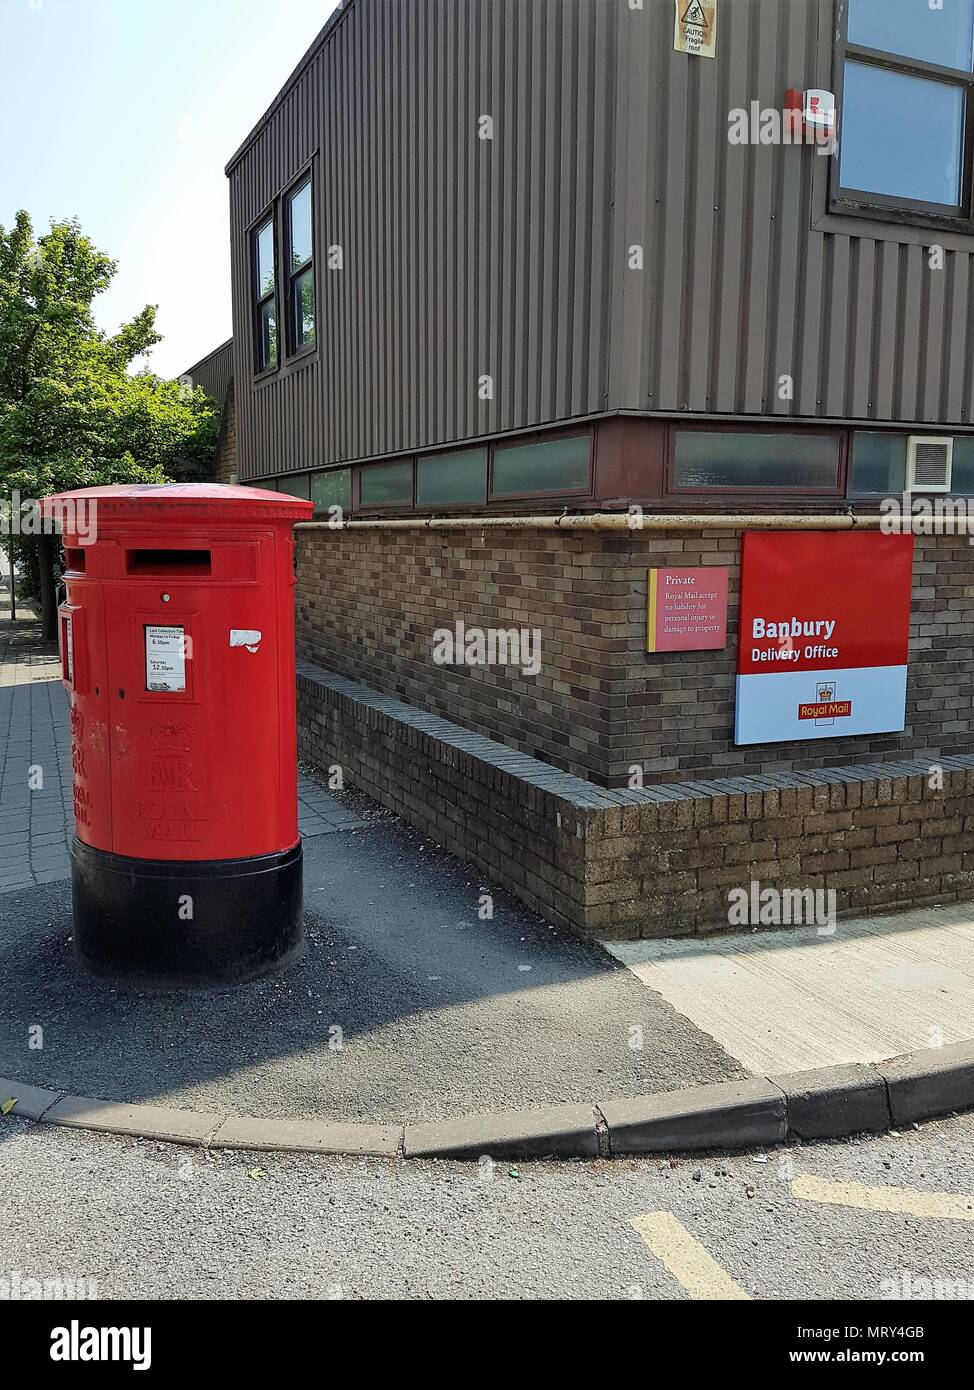 Royal Mail Delivery Sorting Office, Banbury, Oxfordshire, UK Stock Photo